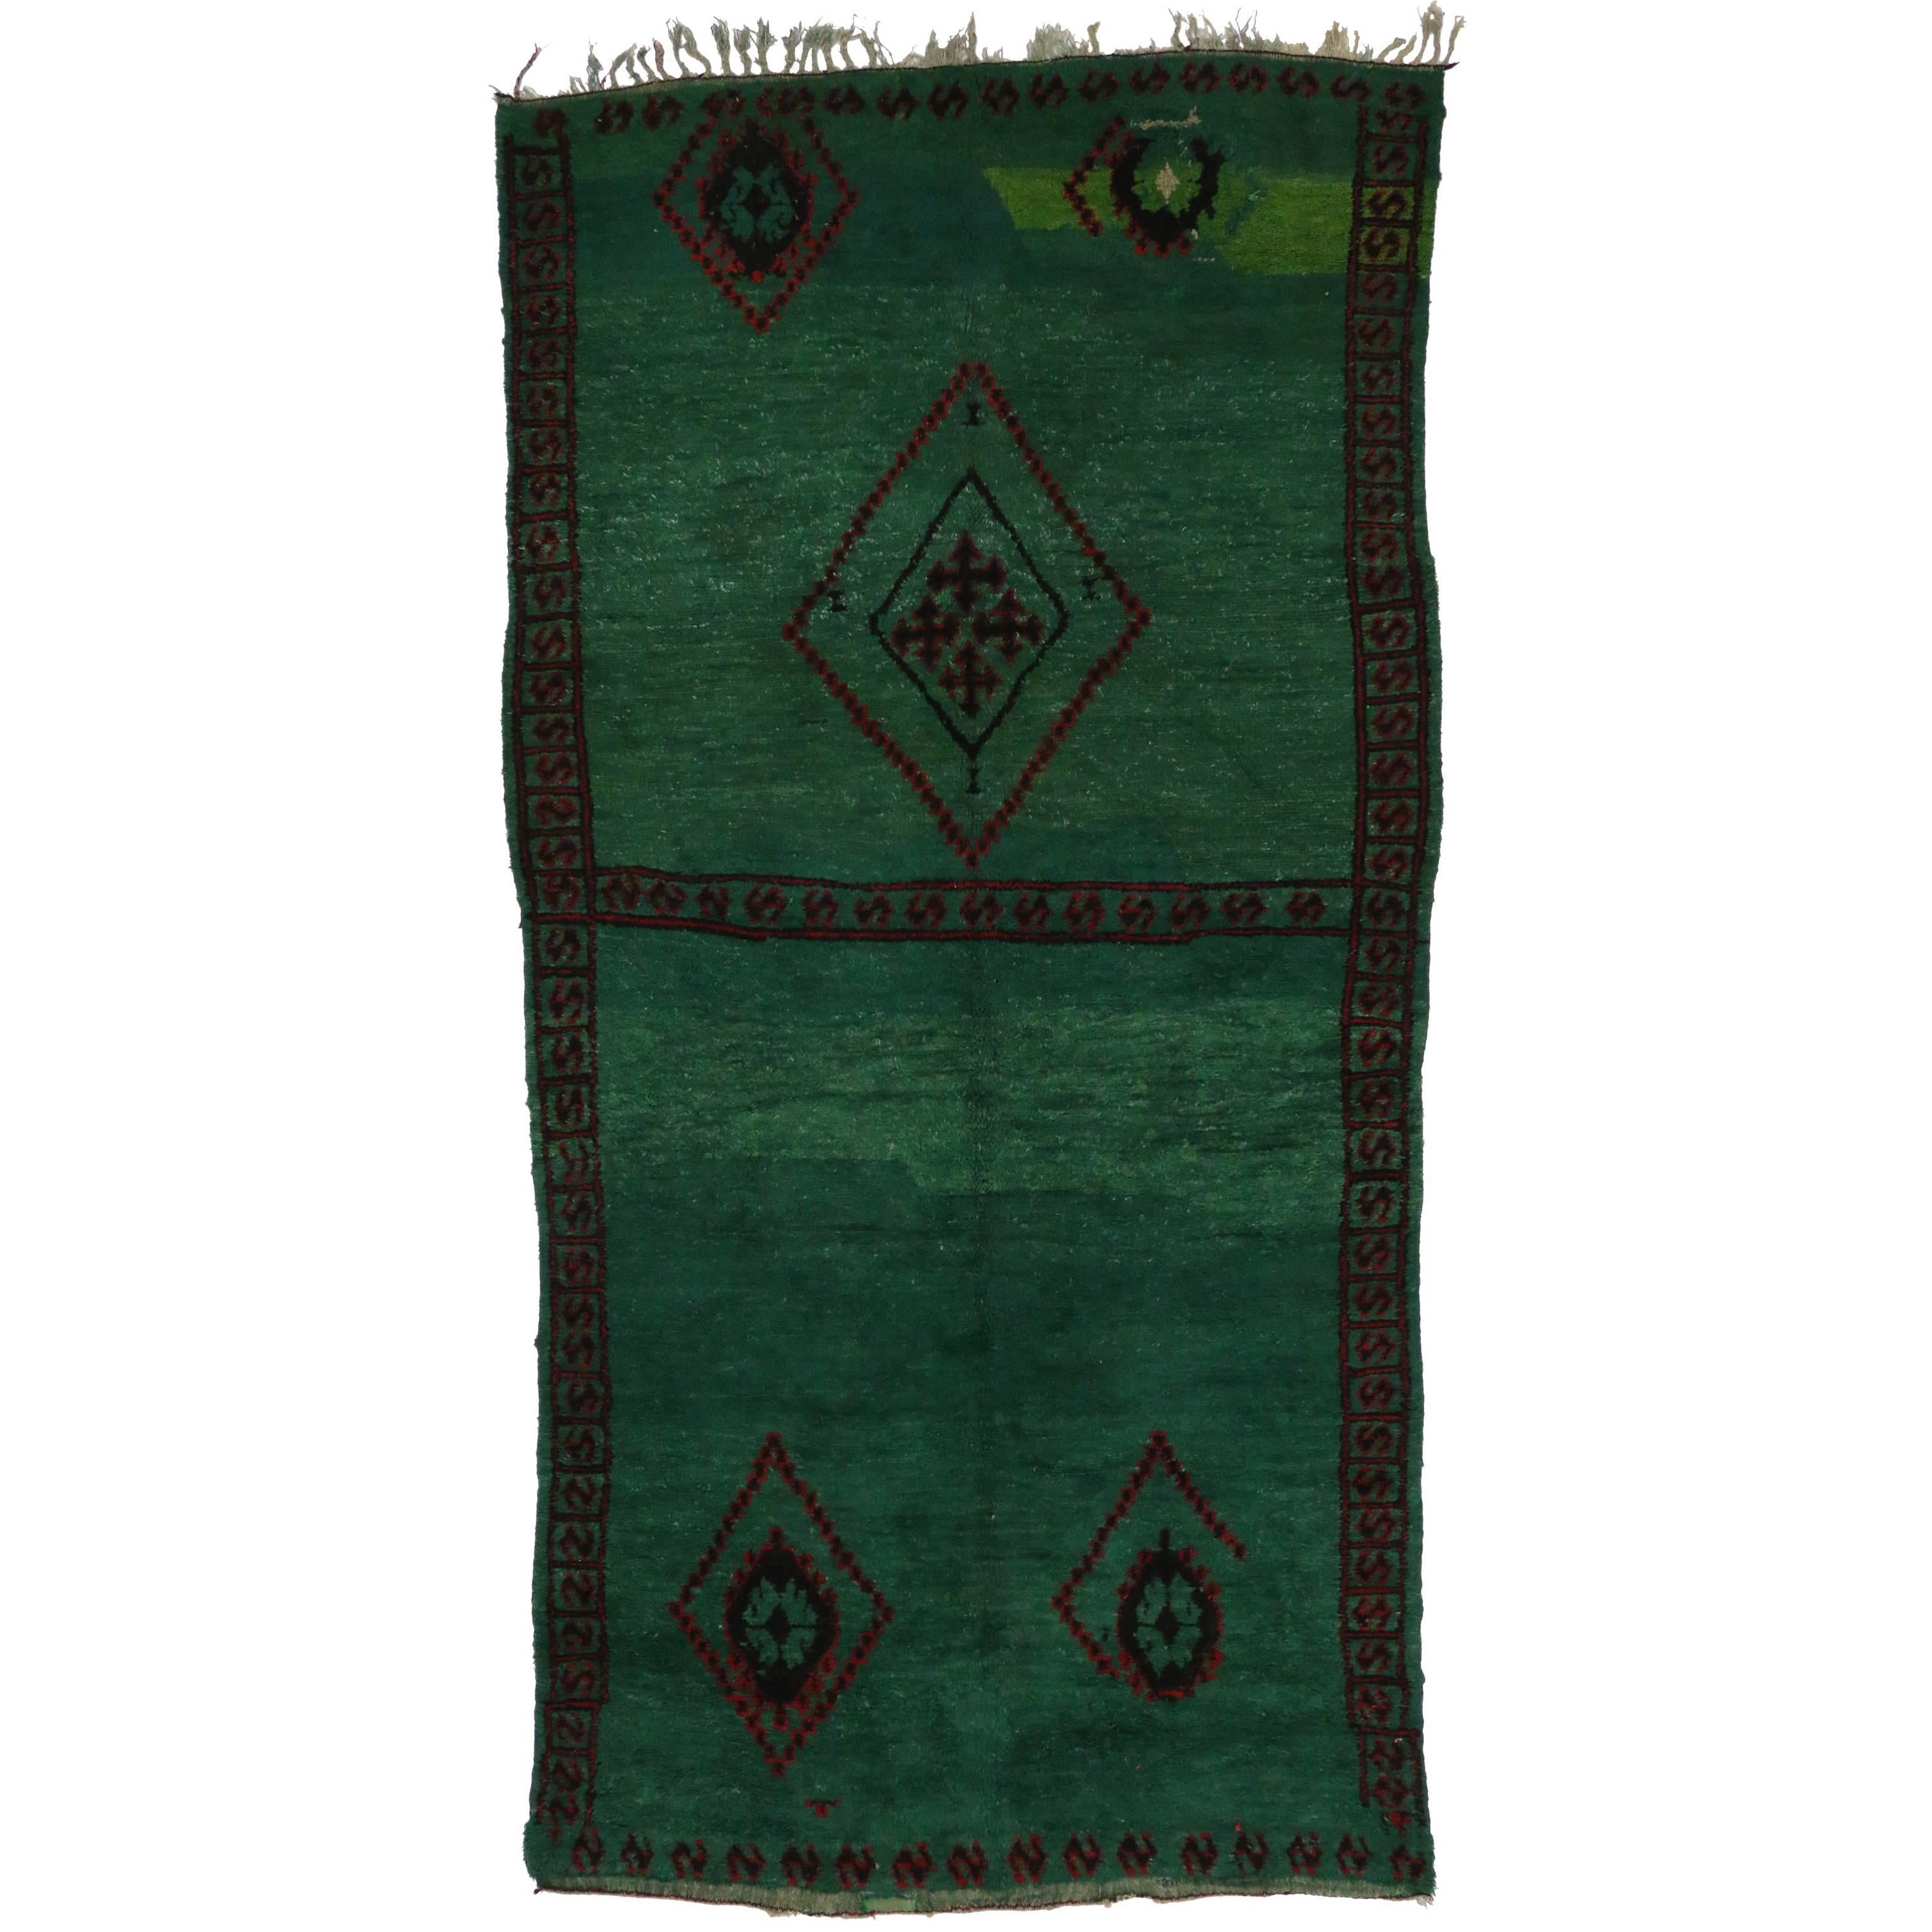 Green Beni M'guild Moroccan Rug in Malachite Color with Tribal Style